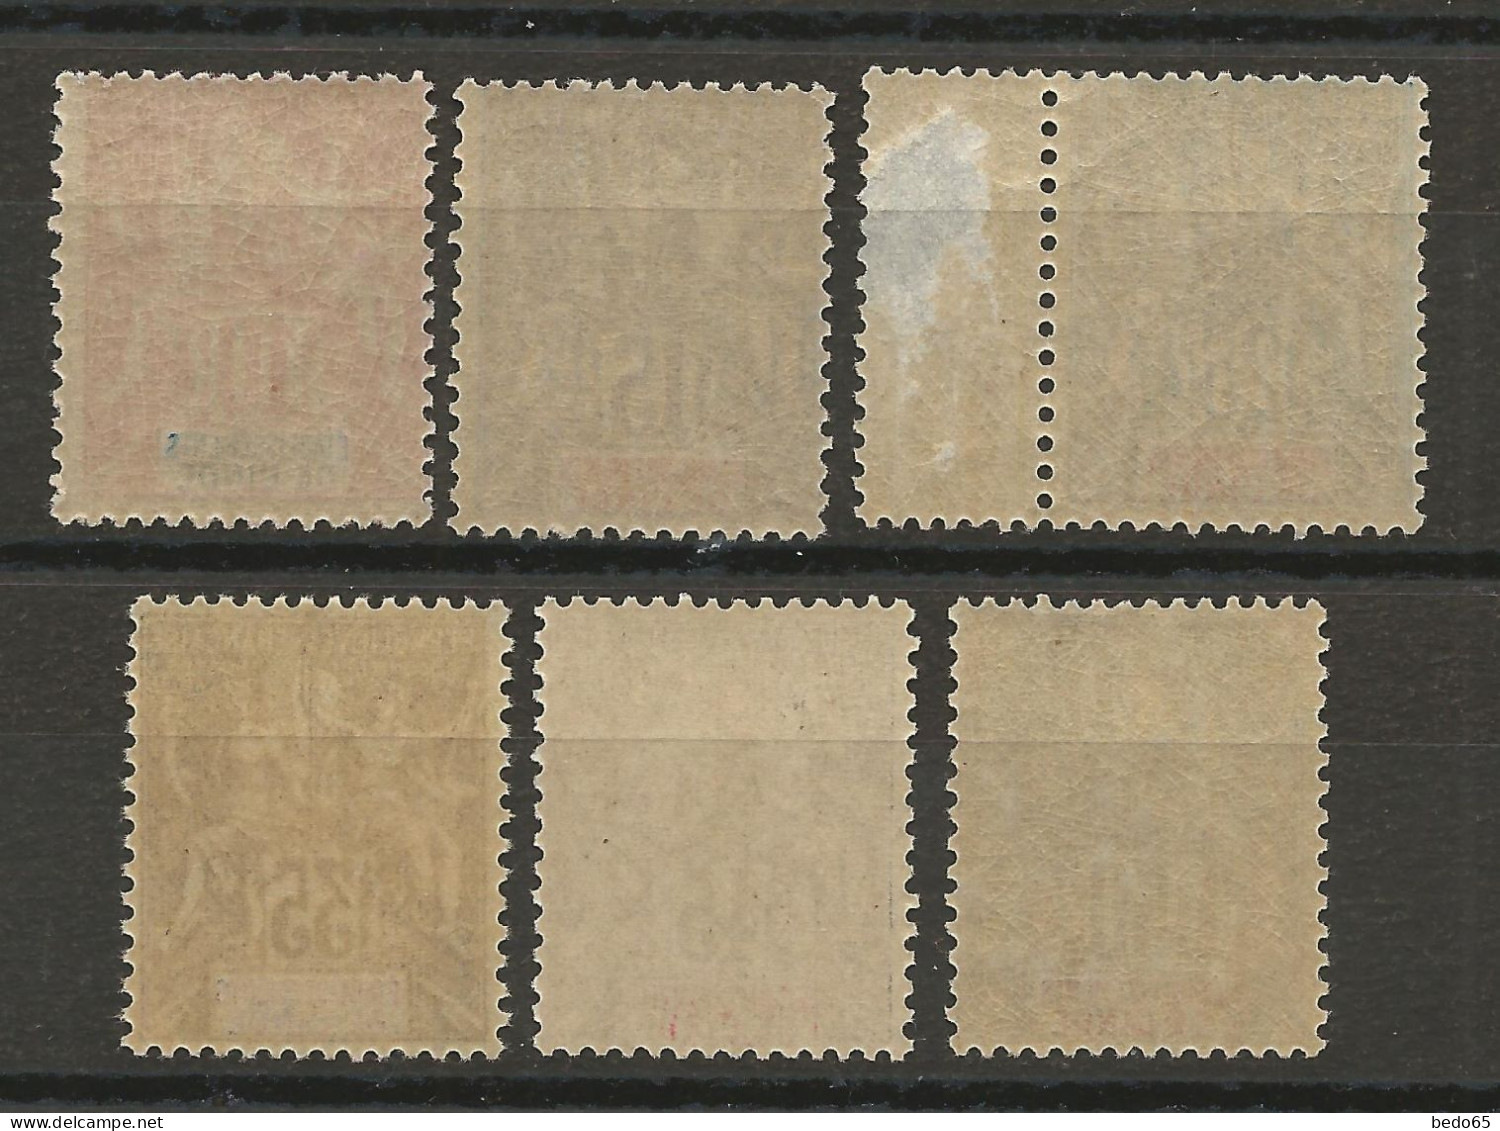 INDE N° 14 à 19 NEUF** LUXE  SANS CHARNIERE / Hingeless / MNH - Unused Stamps